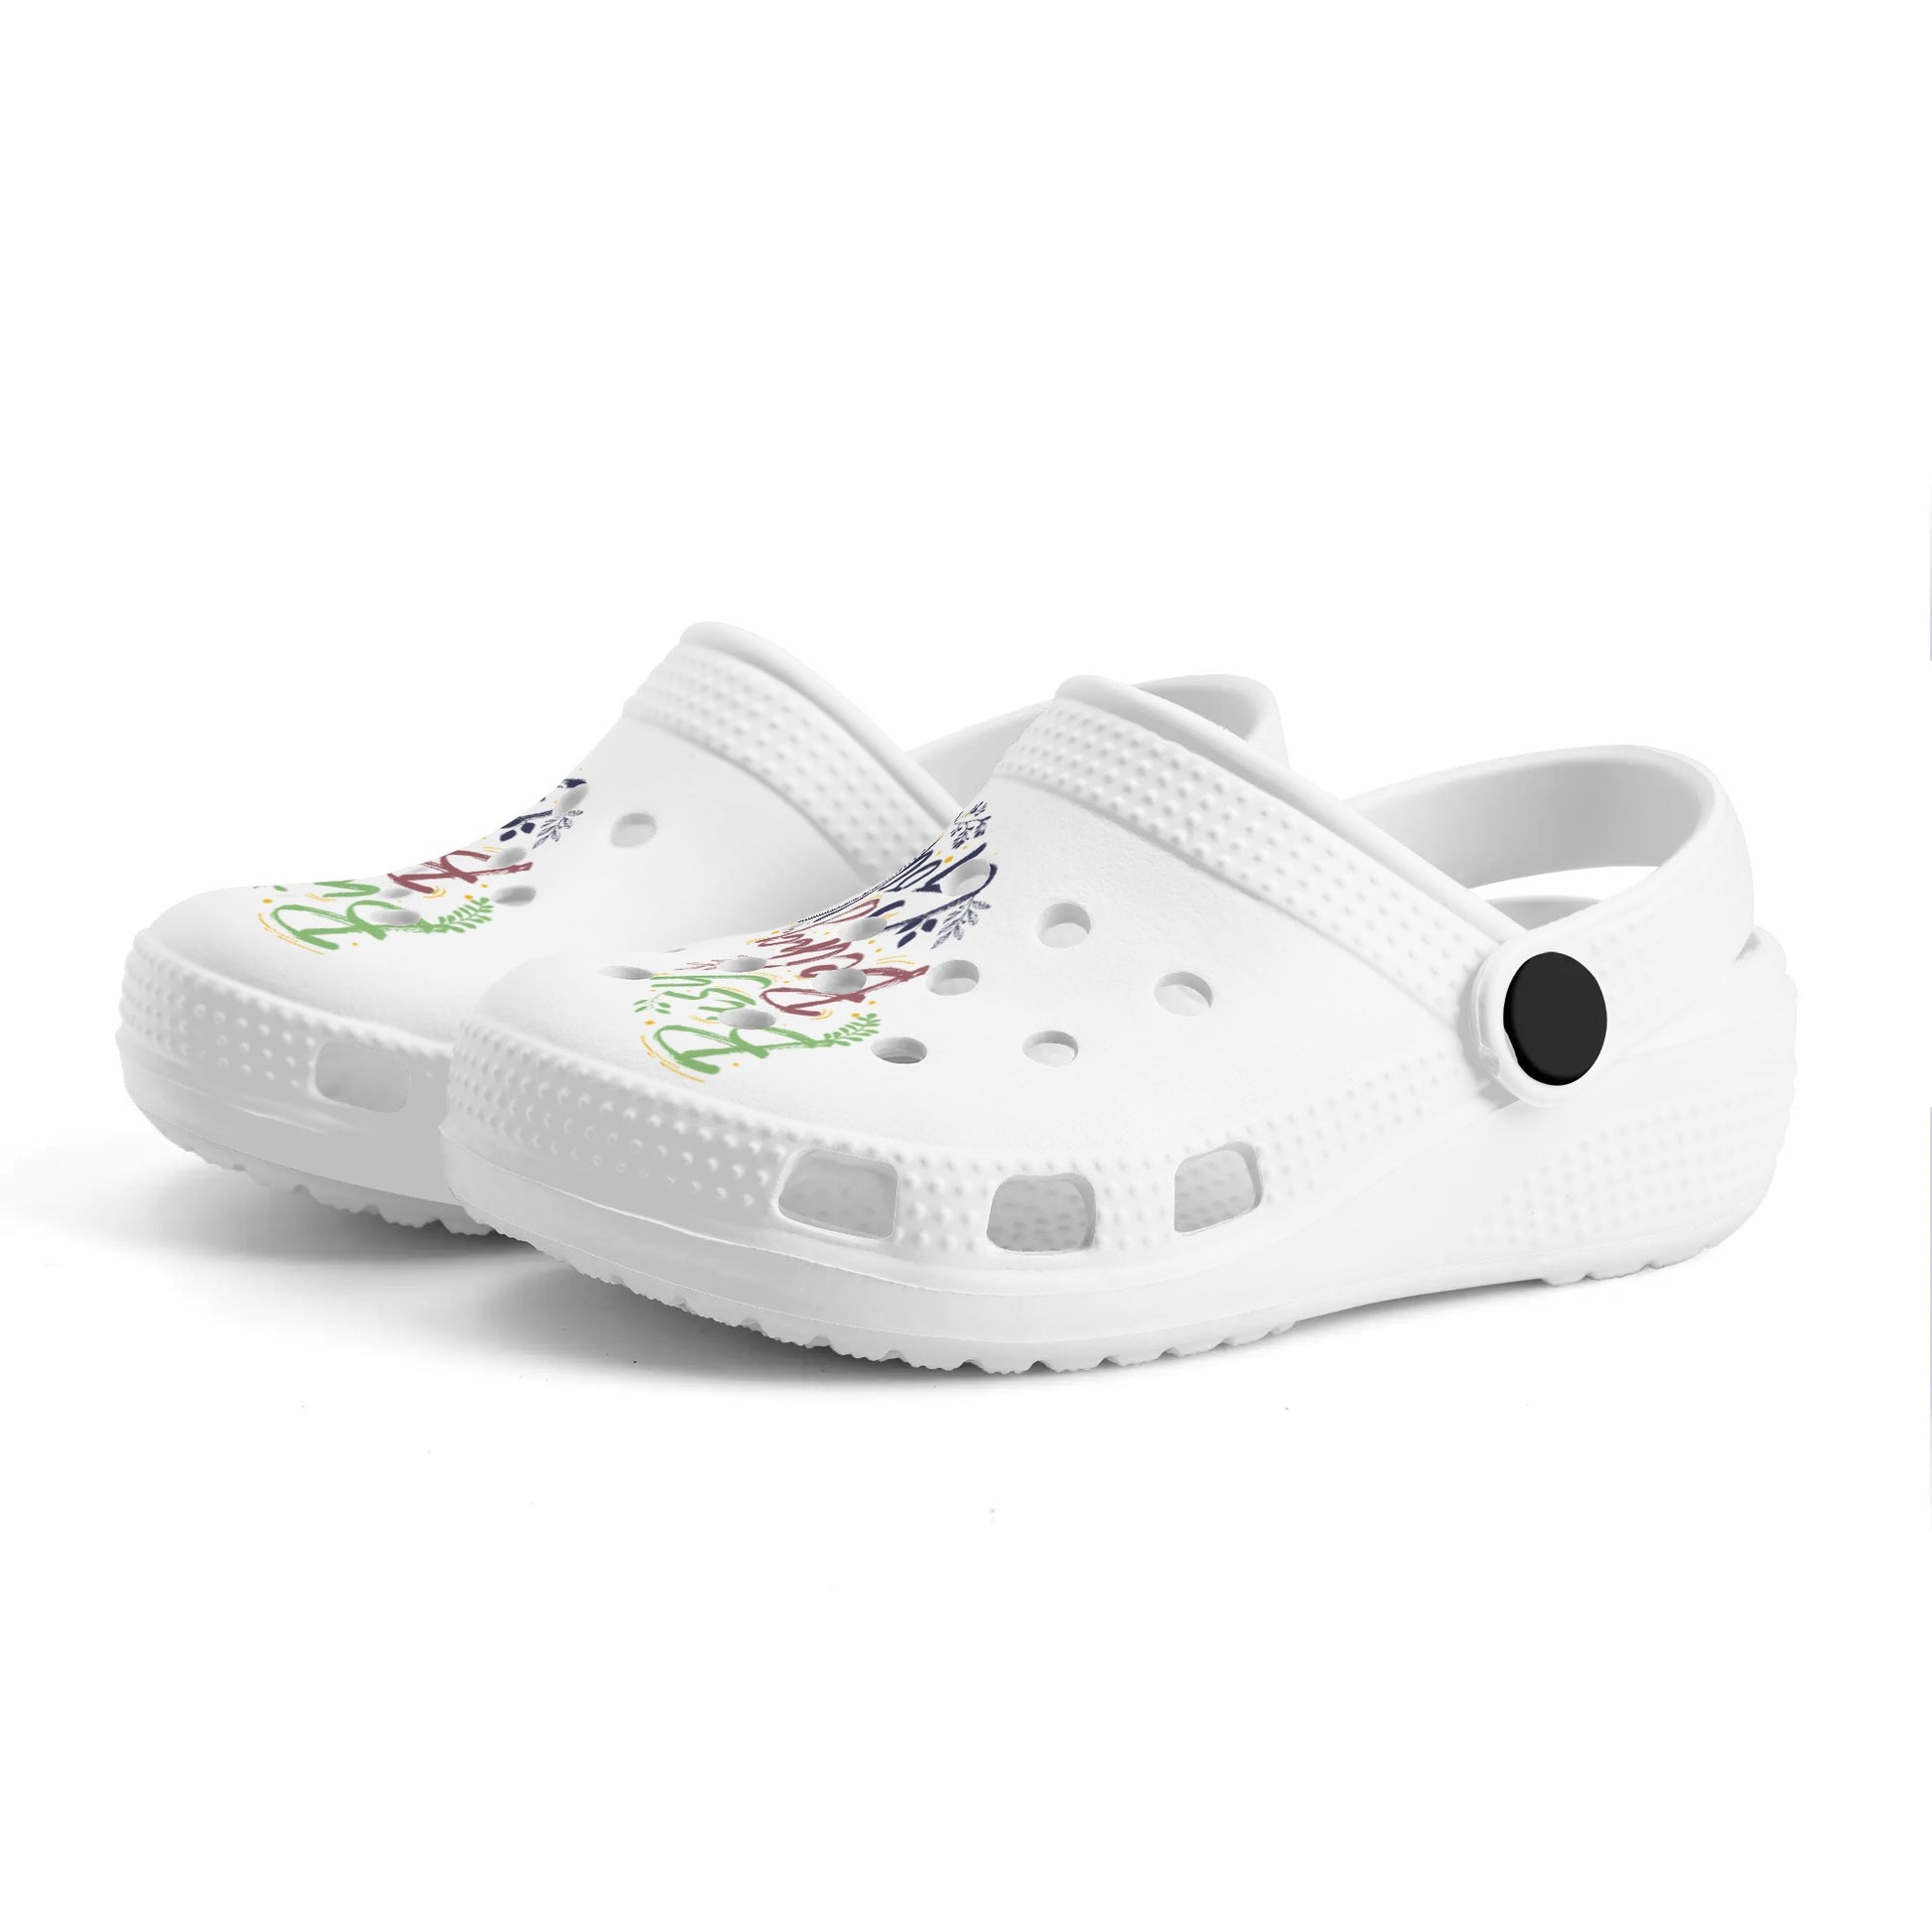 Busy Being Godly Outcomes Kids Classic Christian Crocs popcustoms